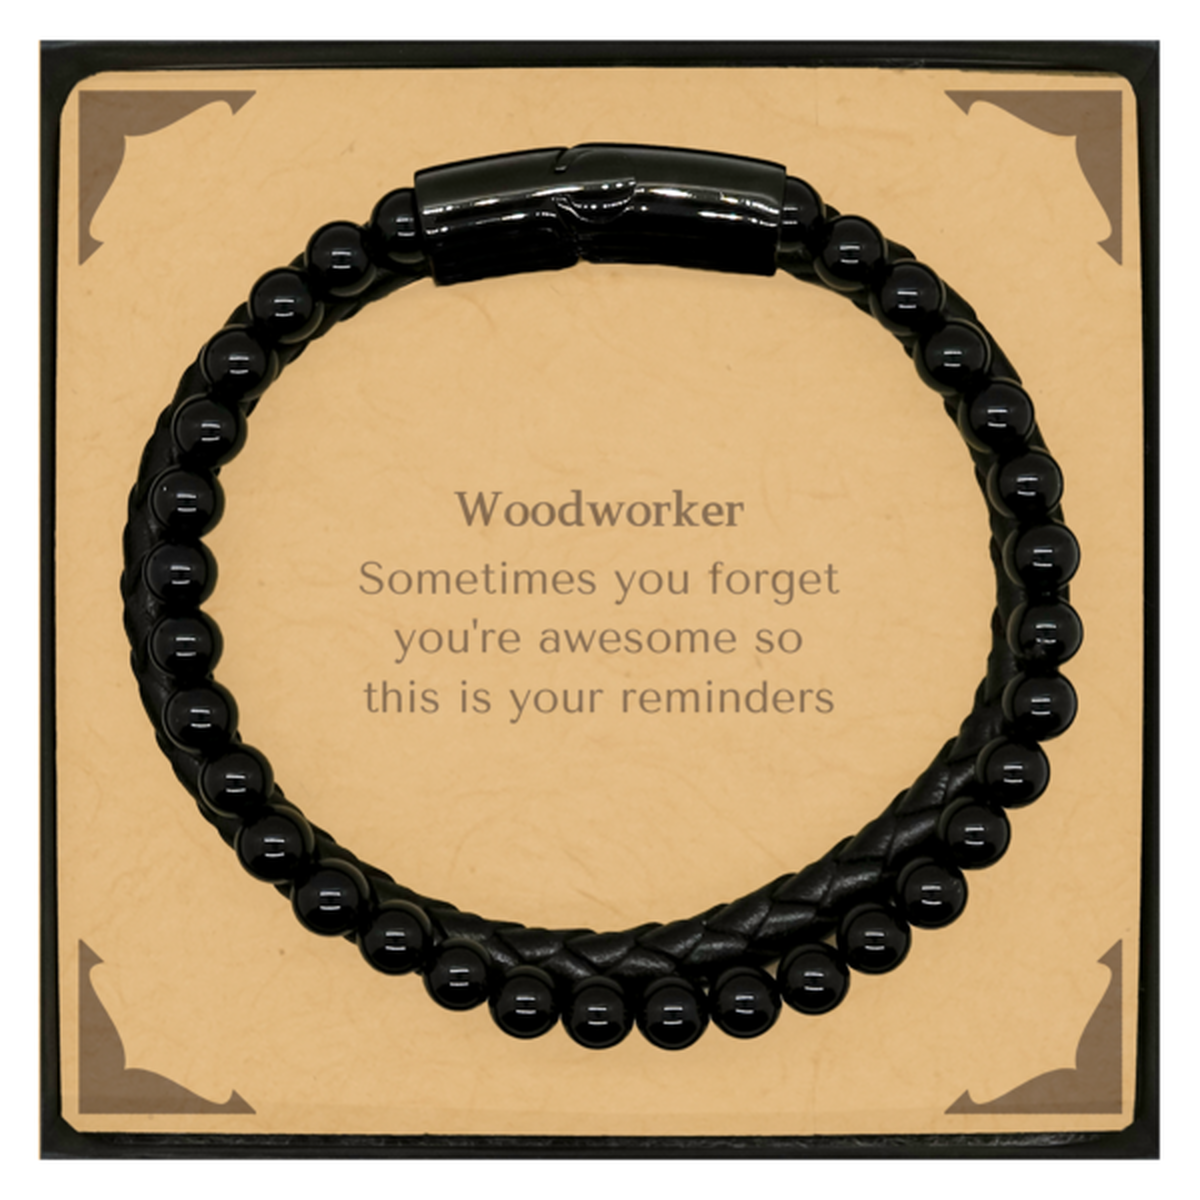 Sentimental Woodworker Stone Leather Bracelets, Woodworker Sometimes you forget you're awesome so this is your reminders, Graduation Christmas Birthday Gifts for Woodworker, Men, Women, Coworkers